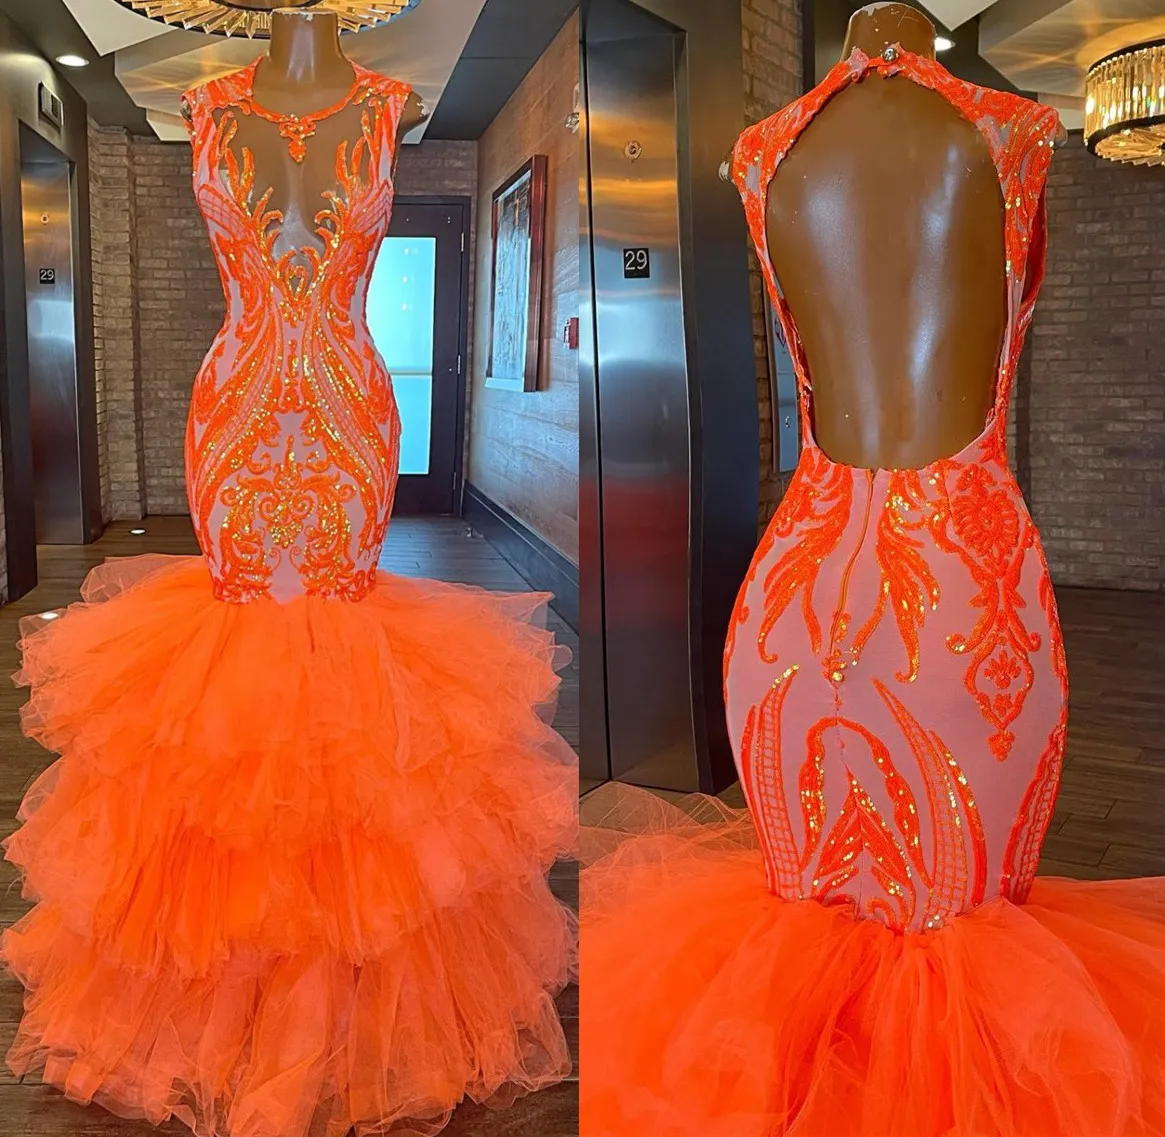 2023 Arabic Aso Ebi Orange Mermaid Prom Dresses Sequined Lace Evening Formal Party Second Reception Birthday Engagement Bridesmaid Gowns Dress ZJ4403